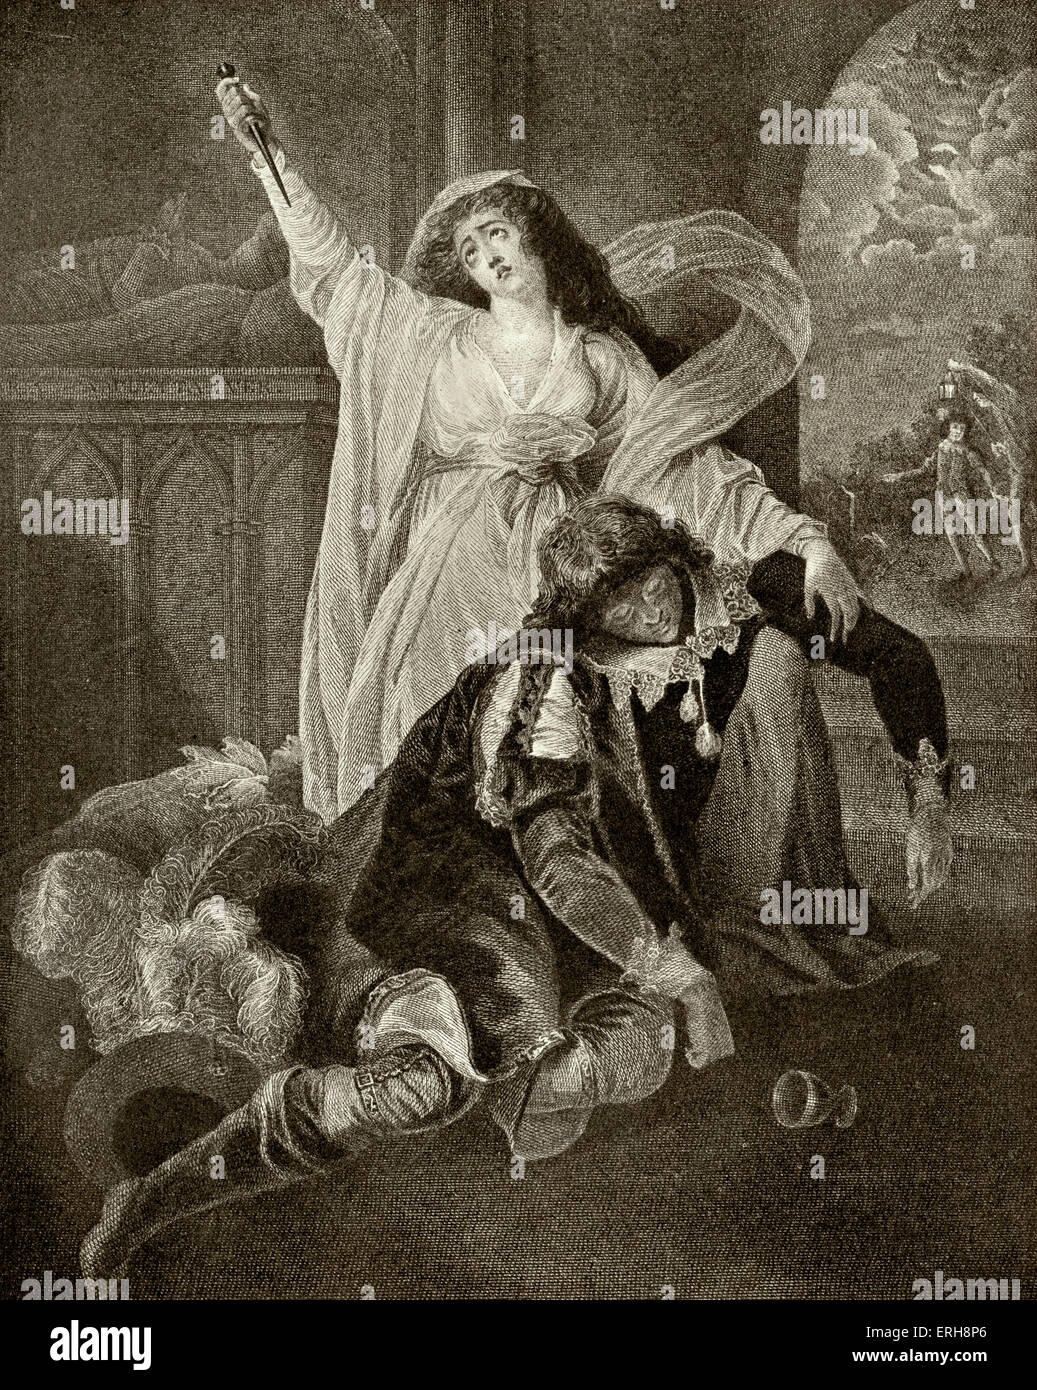 William SHAKESPEARE - scene from play Romeo and Juliet scene by Matthew W. Peters. Act V, Sc 3 'O happy dagger!  This is thy Stock Photo